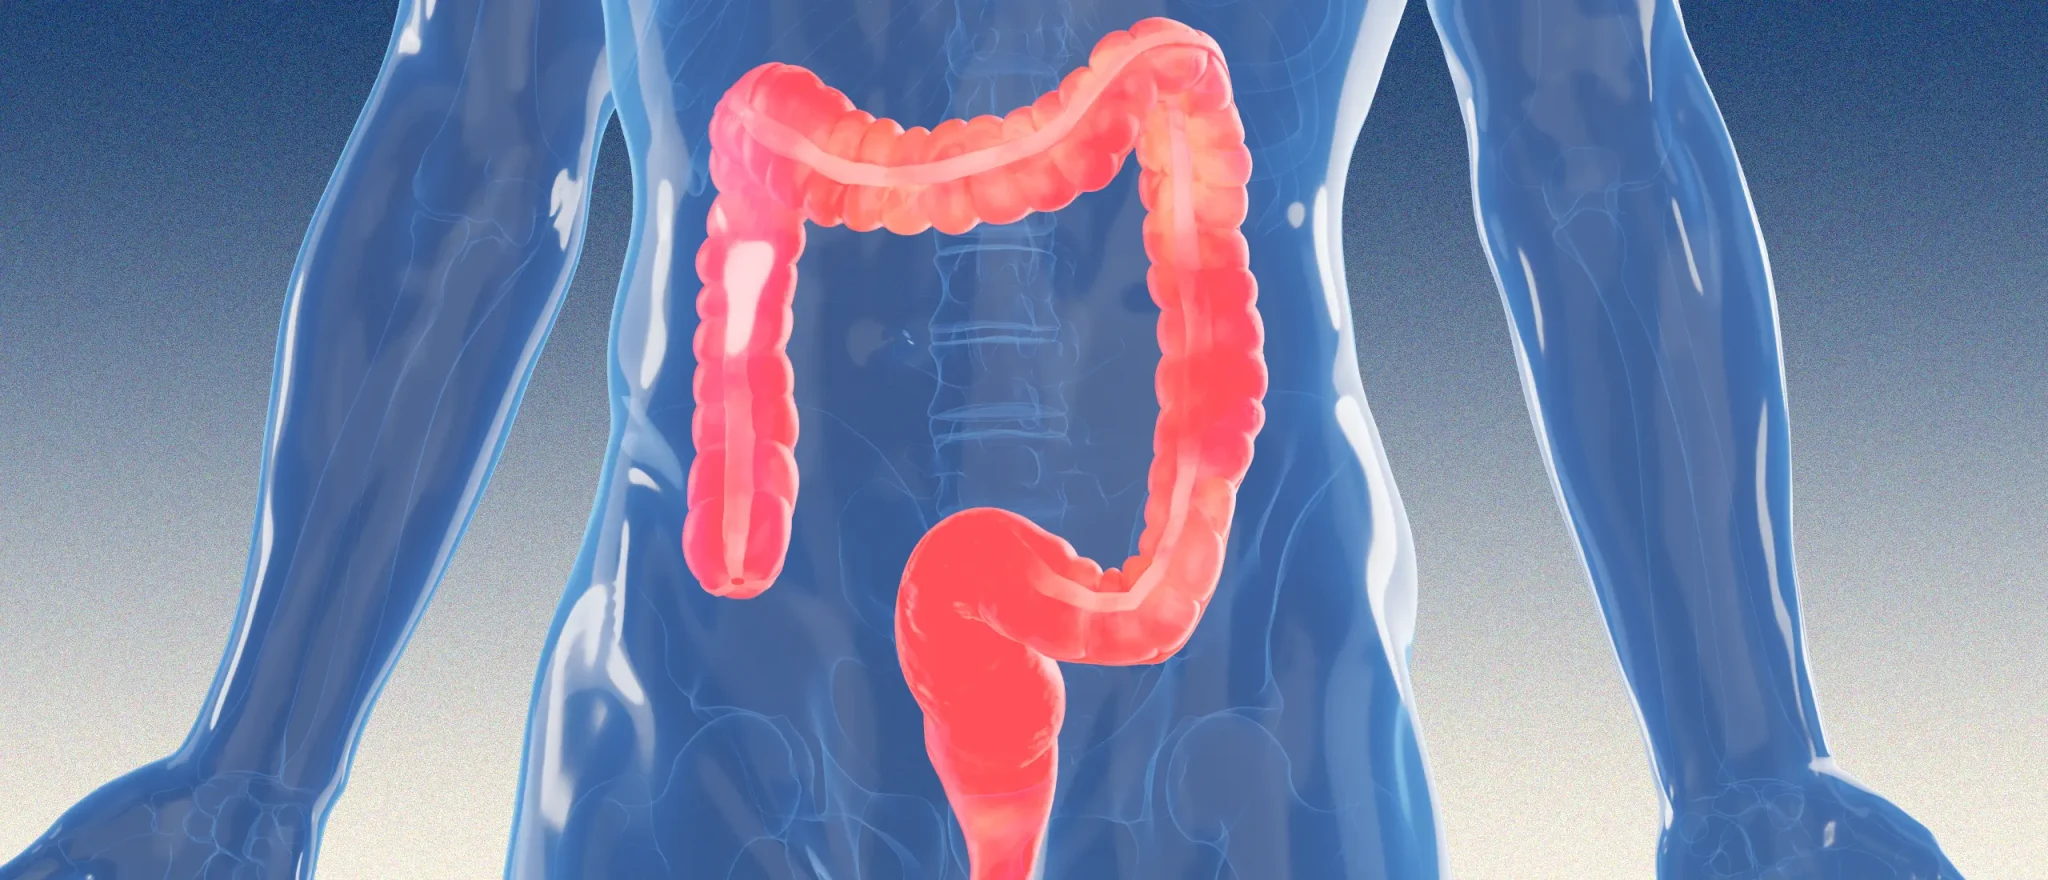 Why Are So Many Young People Getting Colorectal Cancer?